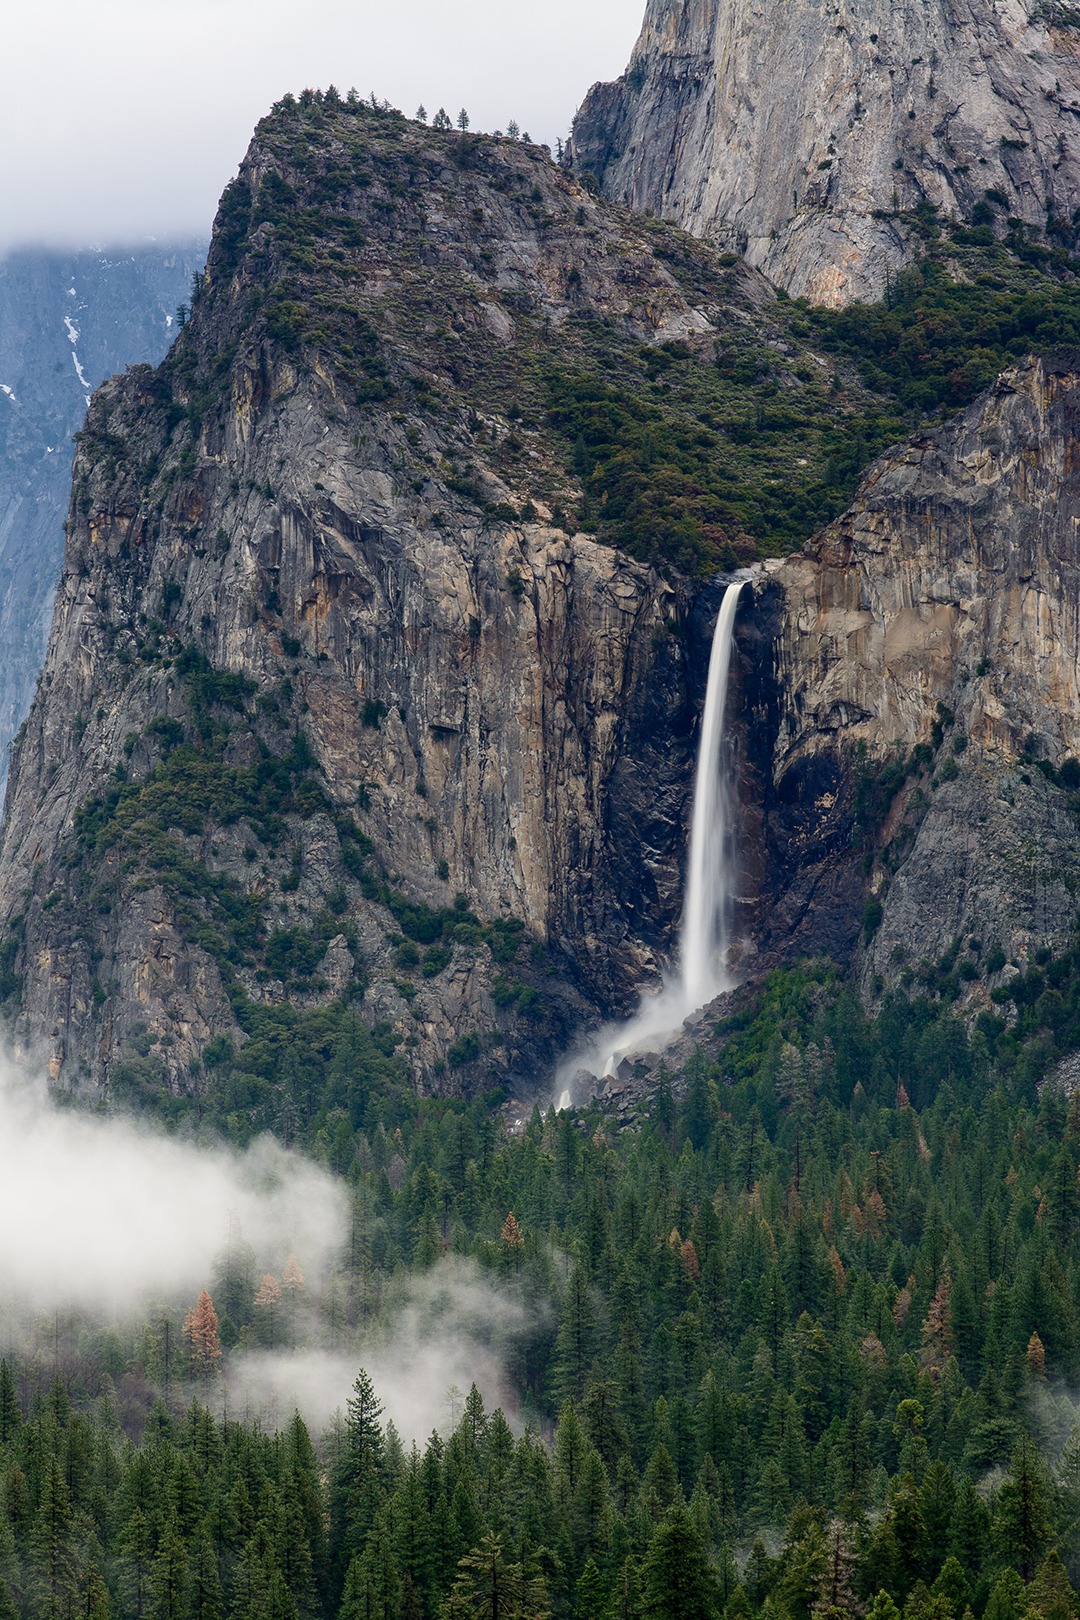 Bridalveil Fall as seen from Tunnel View